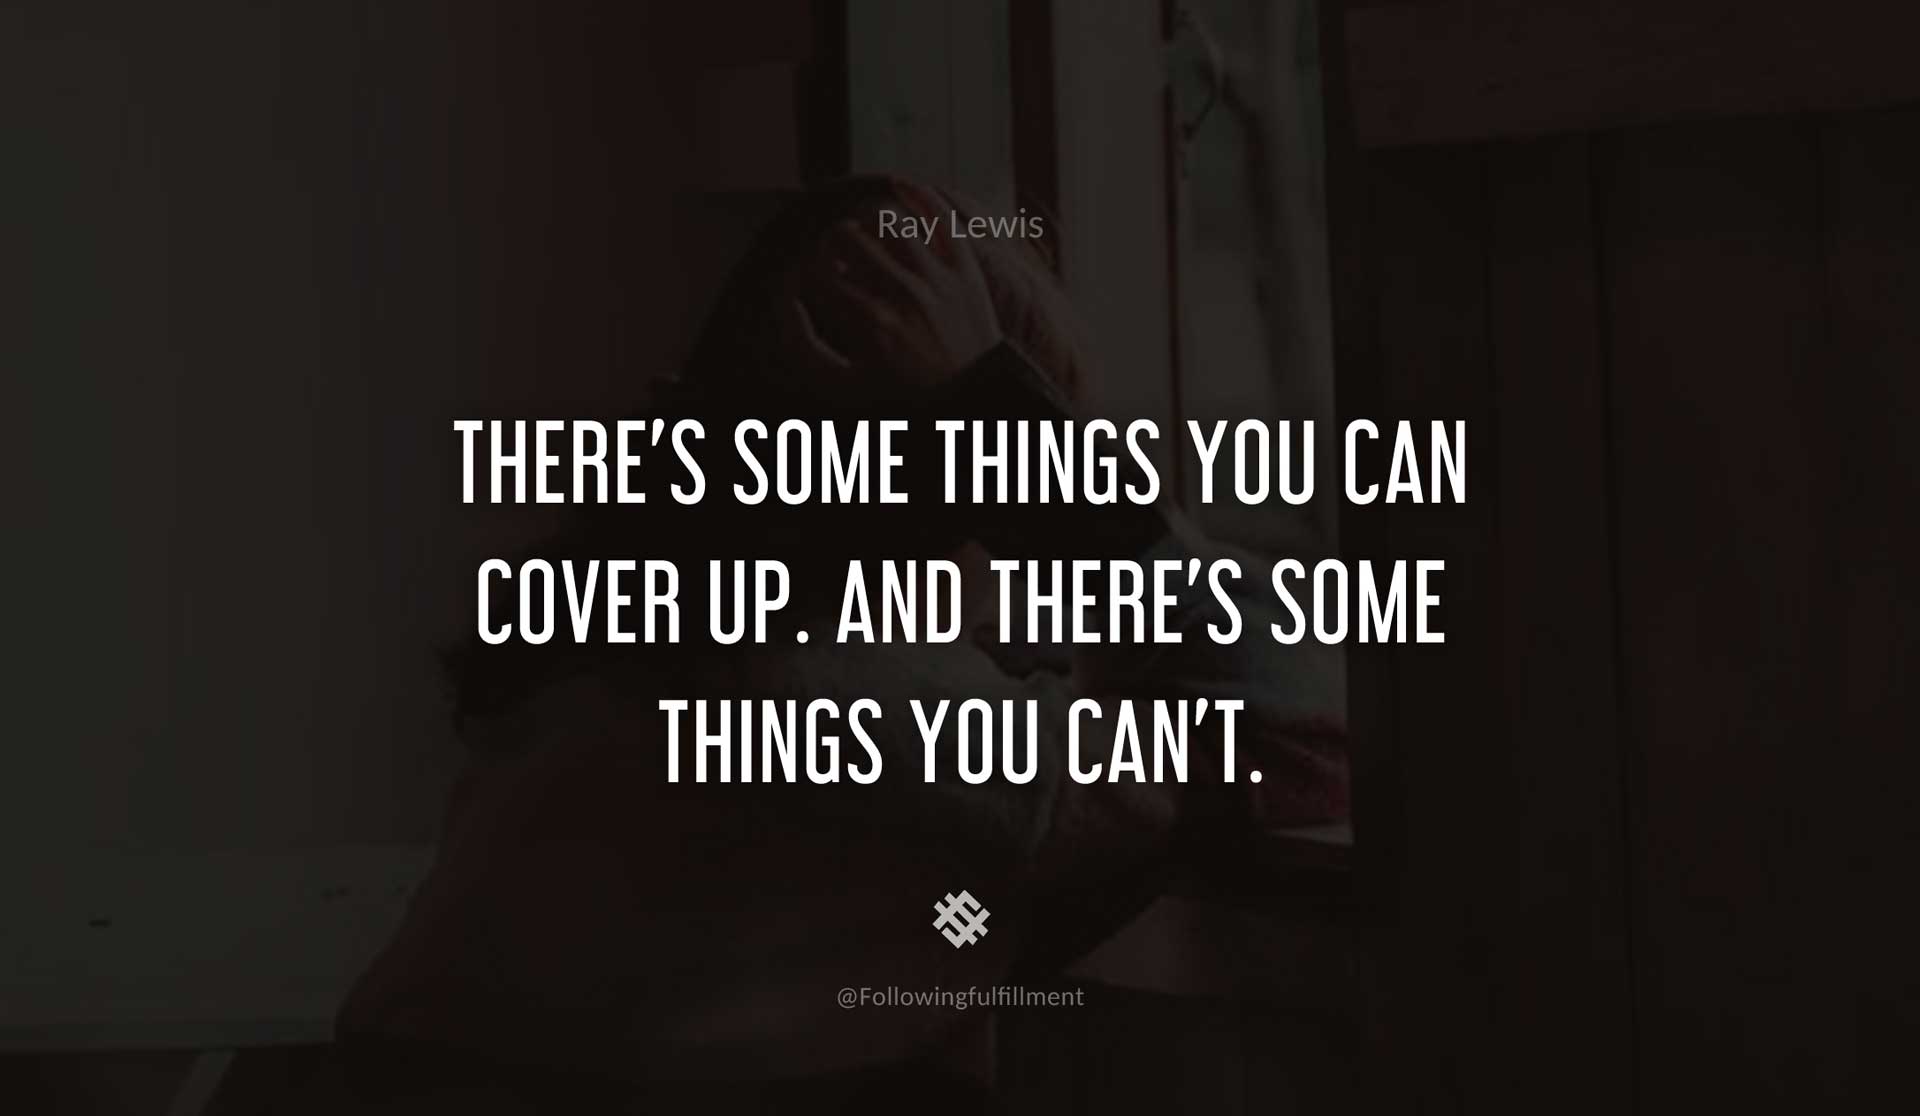 There's-some-things-you-can-cover-up.-And-there's-some-things-you-can't.-RAY-LEWIS-Quote.jpg